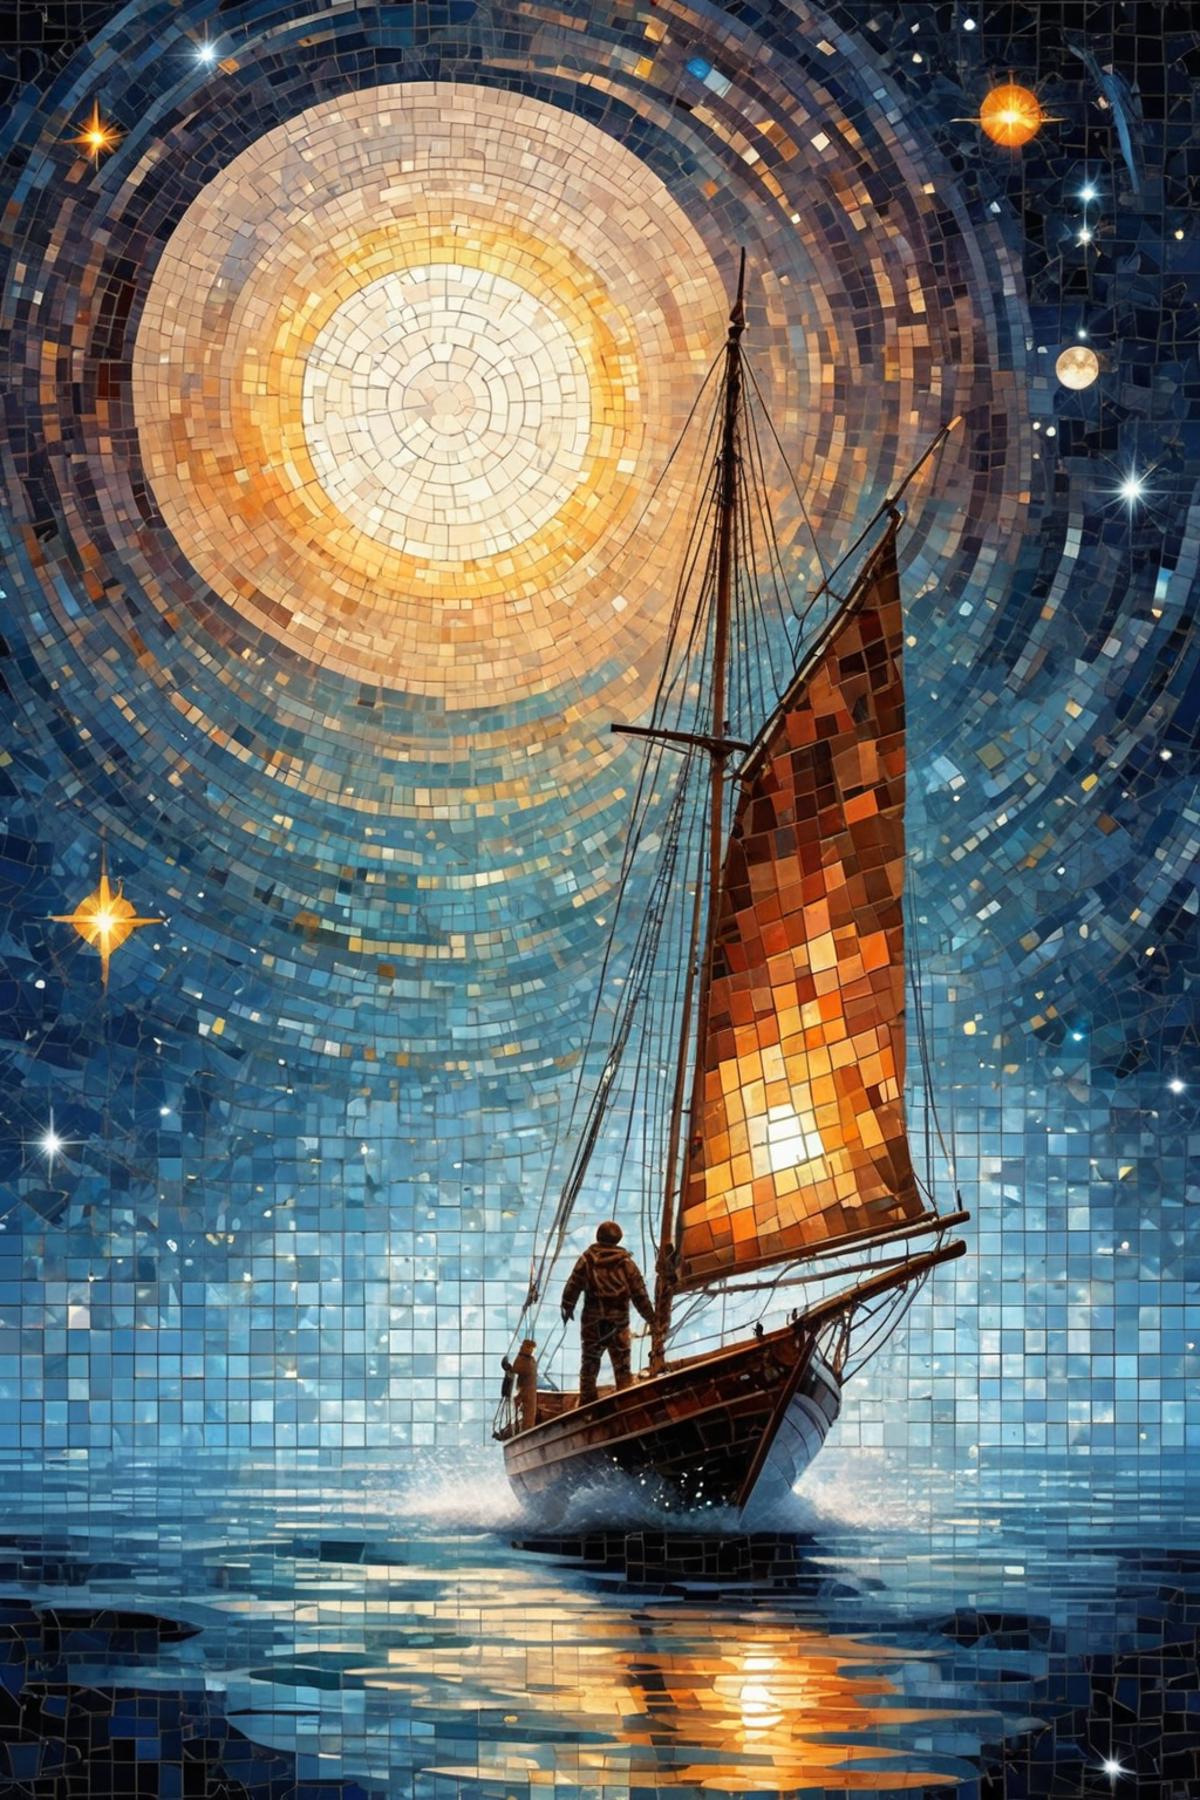 A person is on a sail boat in the middle of a stormy sea at night.